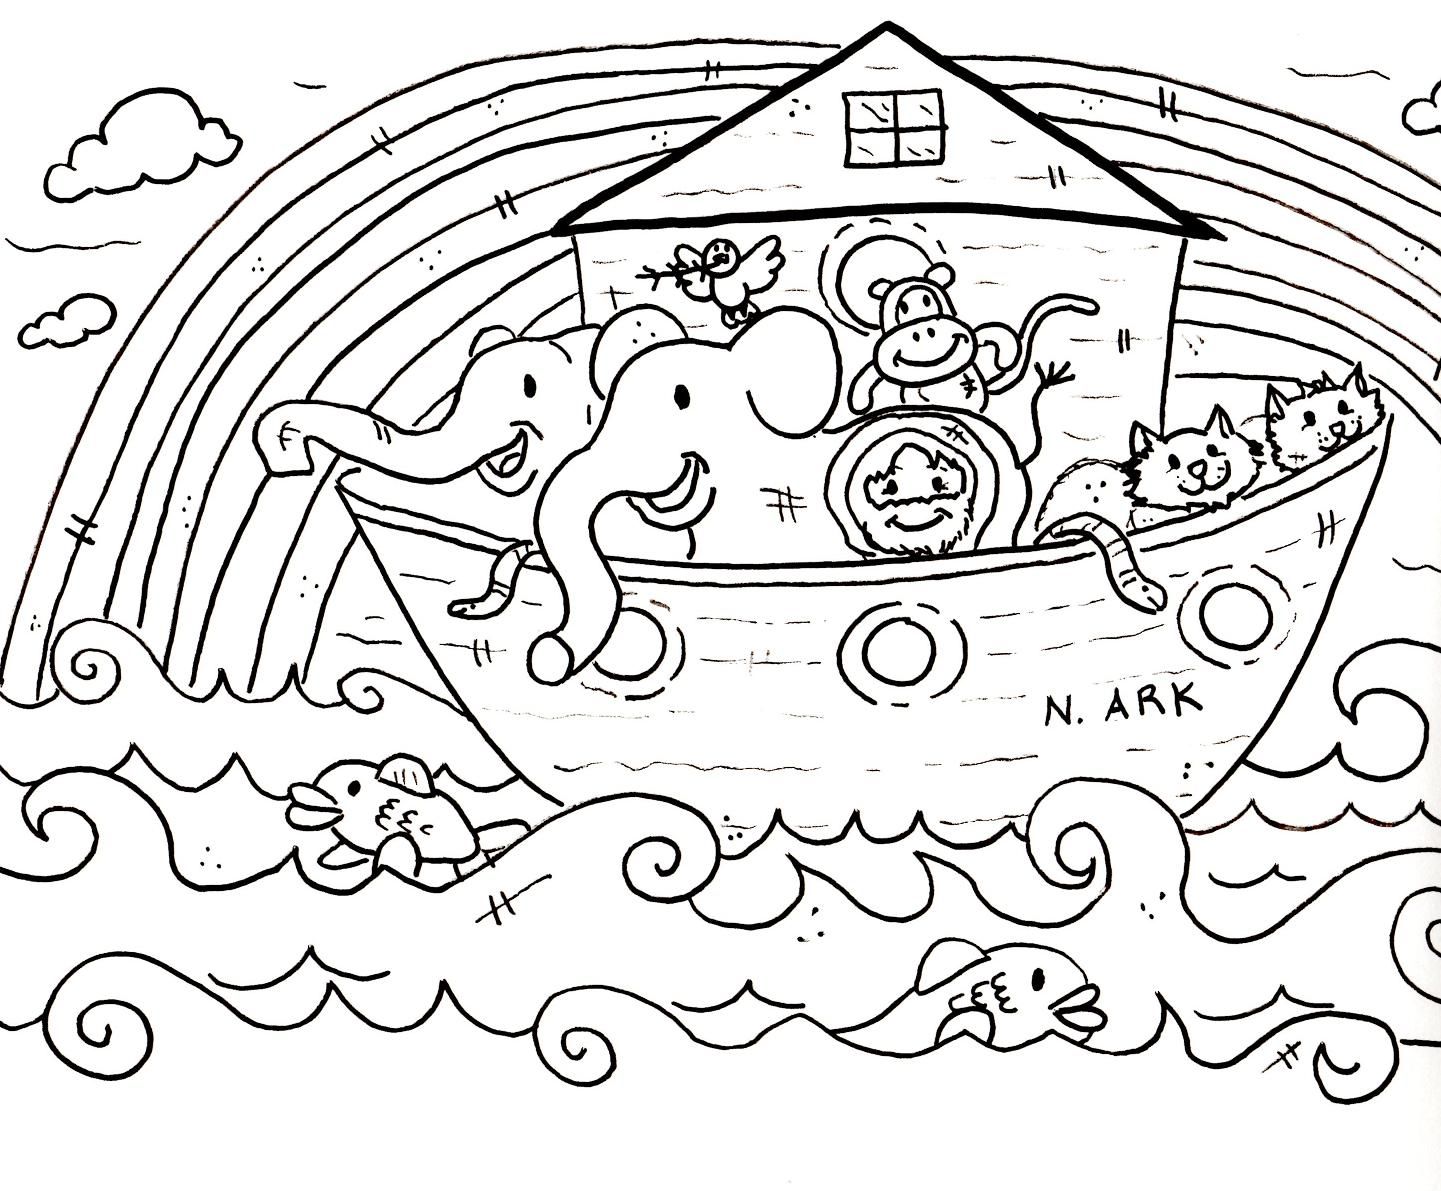 School Age Coloring Pages At GetColorings Free Printable Colorings Pages To Print And Color